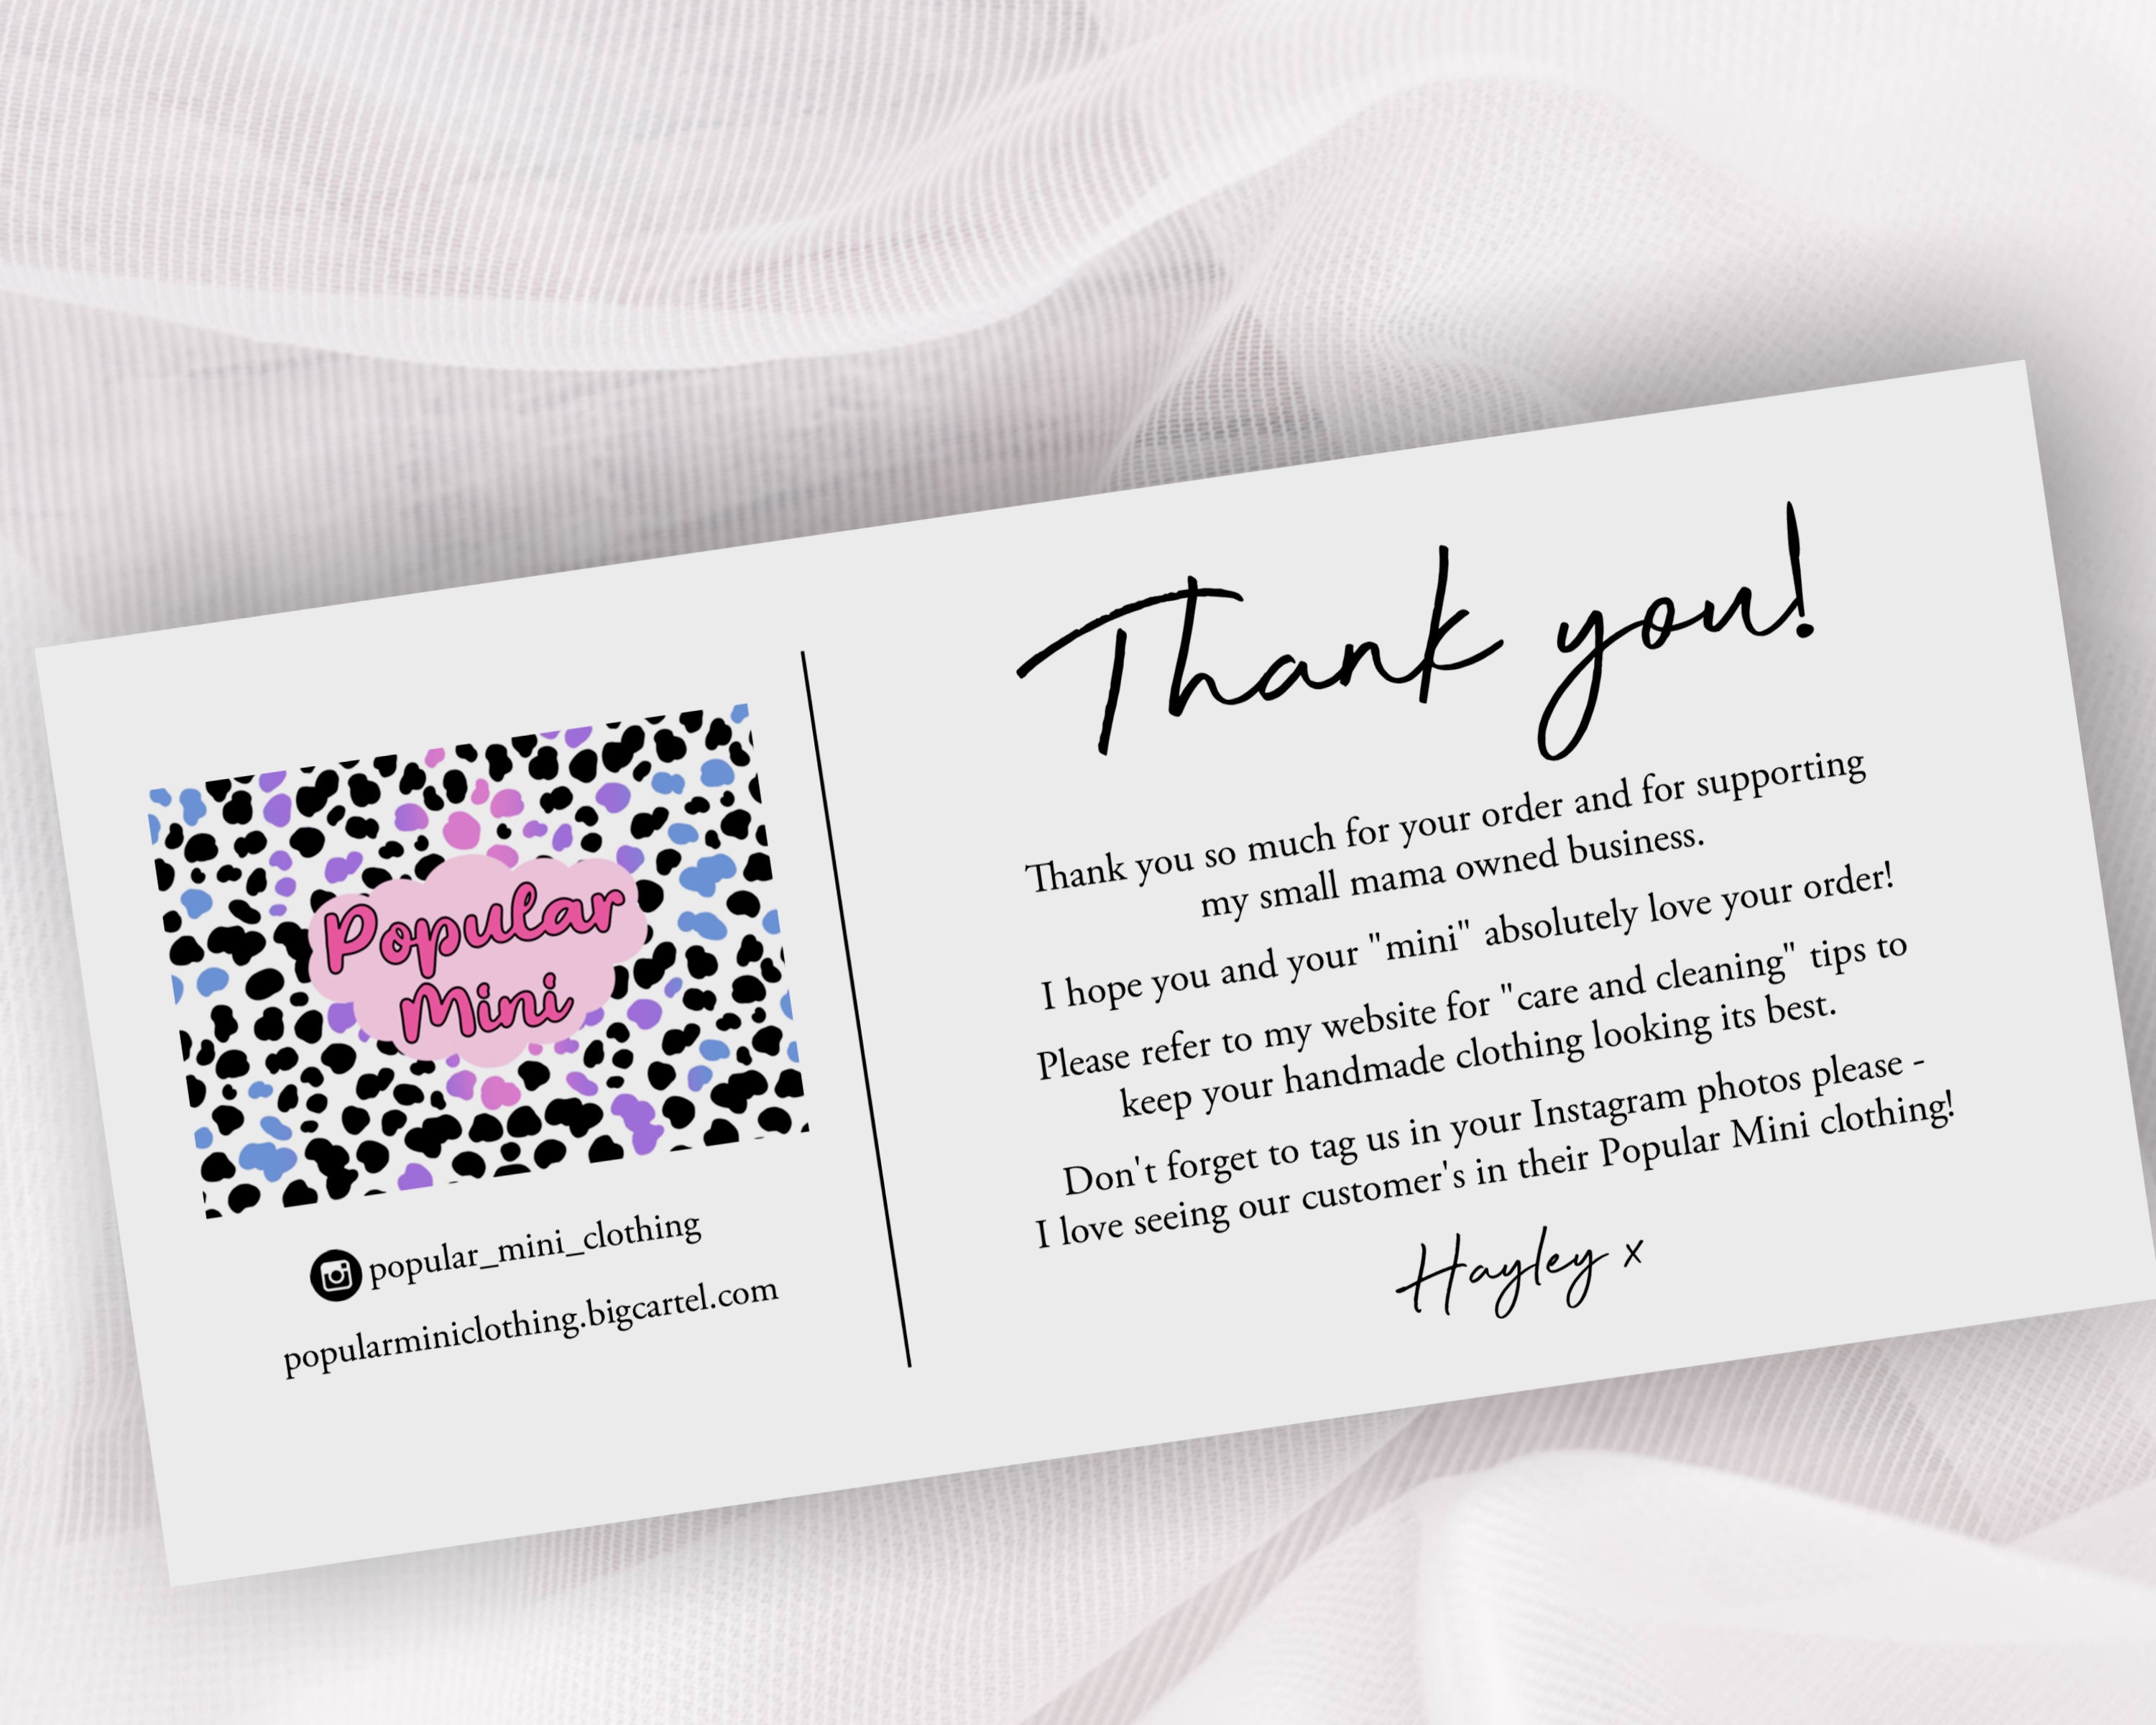 How To Print Small Business Thank You Cards At Home